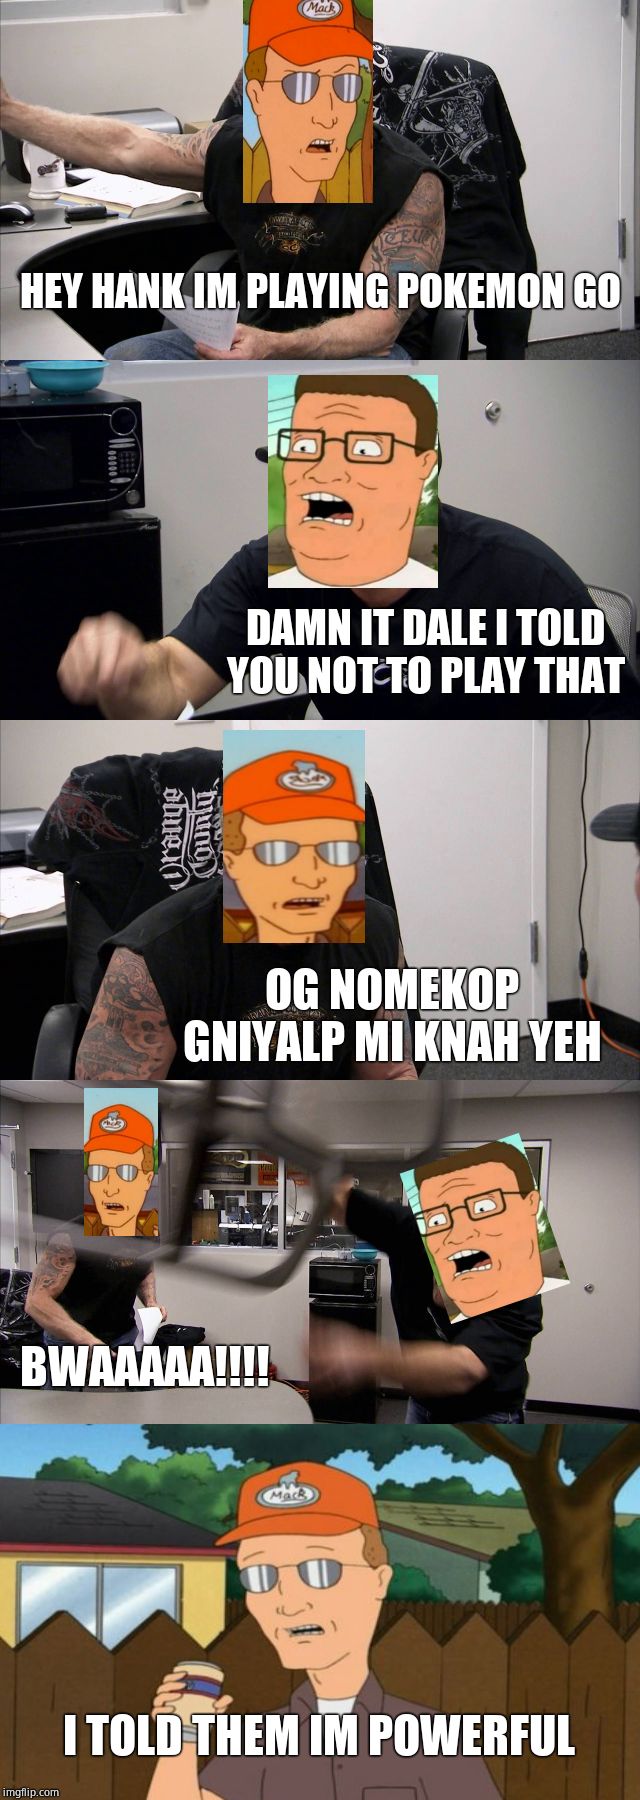 American Chopper Argument | HEY HANK IM PLAYING POKEMON GO; DAMN IT DALE I TOLD YOU NOT TO PLAY THAT; OG NOMEKOP GNIYALP MI KNAH YEH; BWAAAAA!!!! I TOLD THEM IM POWERFUL | image tagged in memes,american chopper argument | made w/ Imgflip meme maker